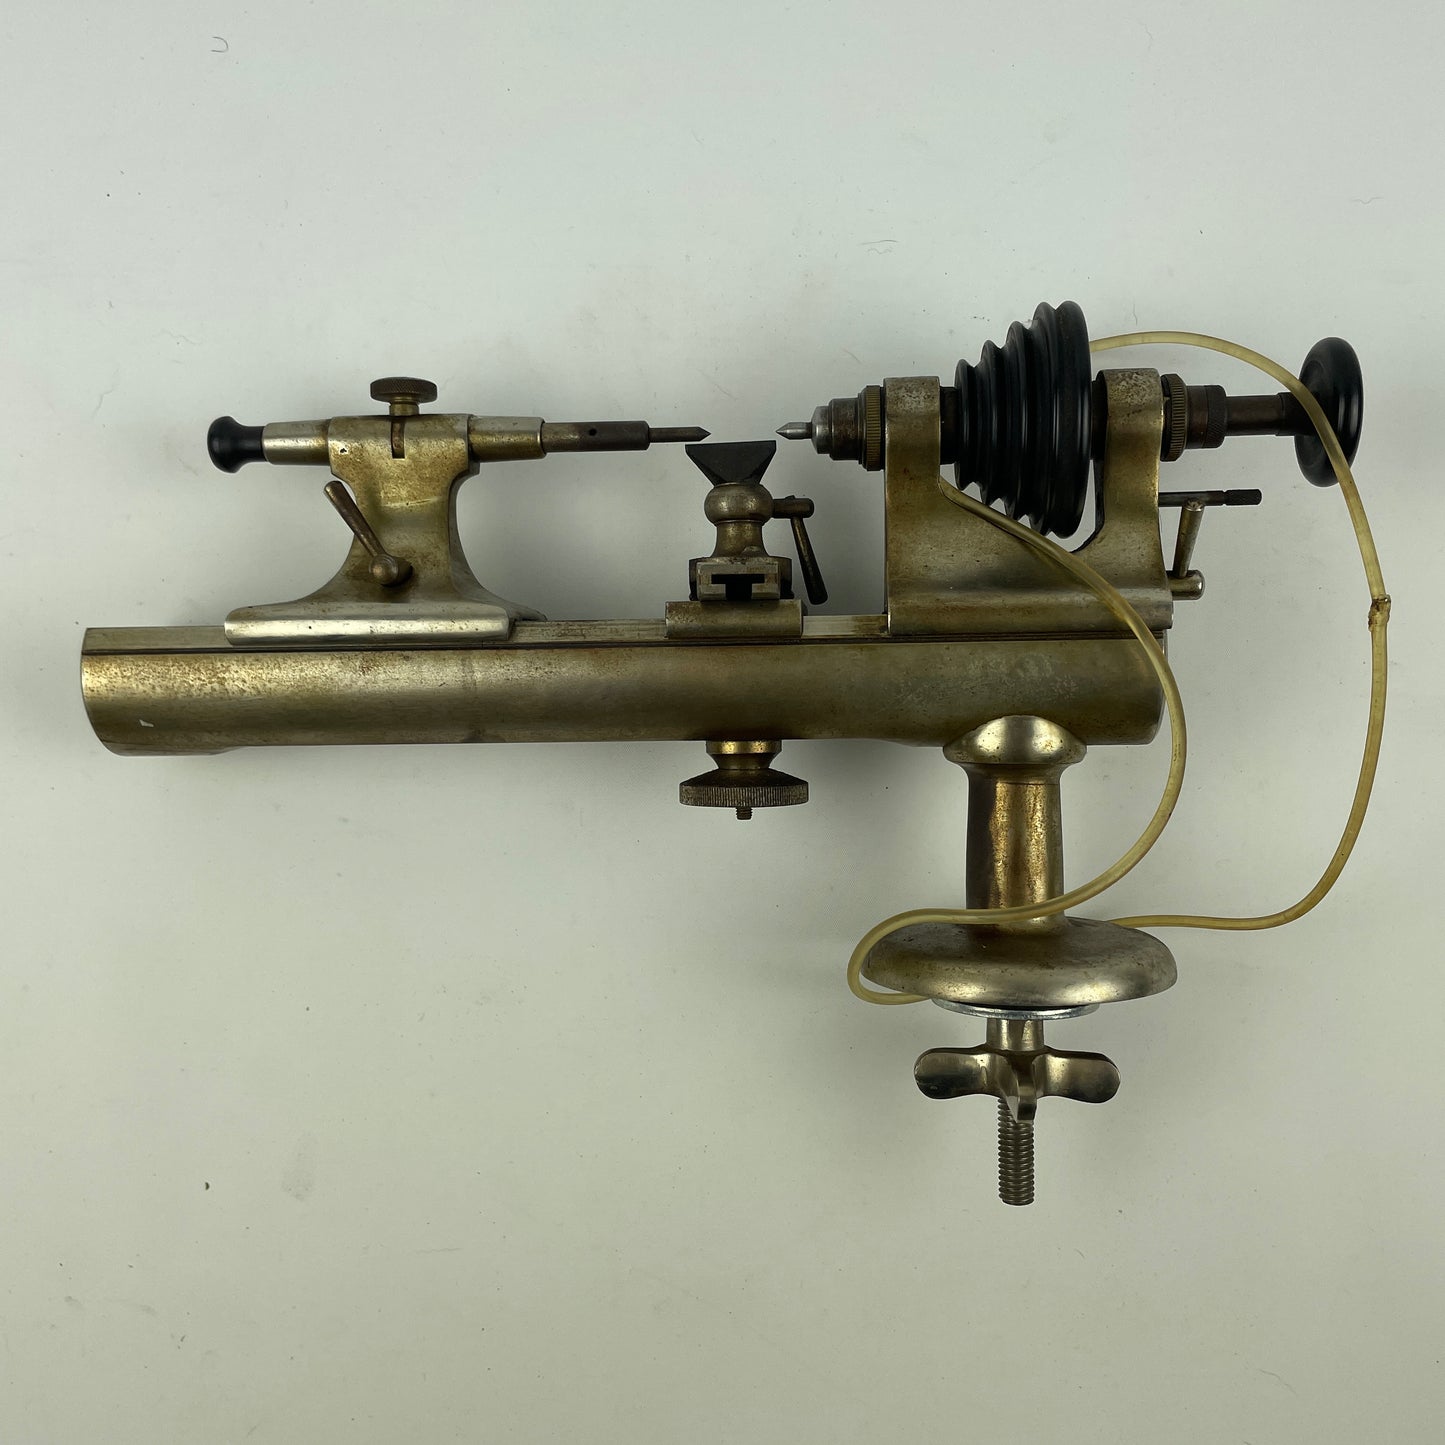 Oct Lot 1- Elson EE 8MM Watchmakers Lathe